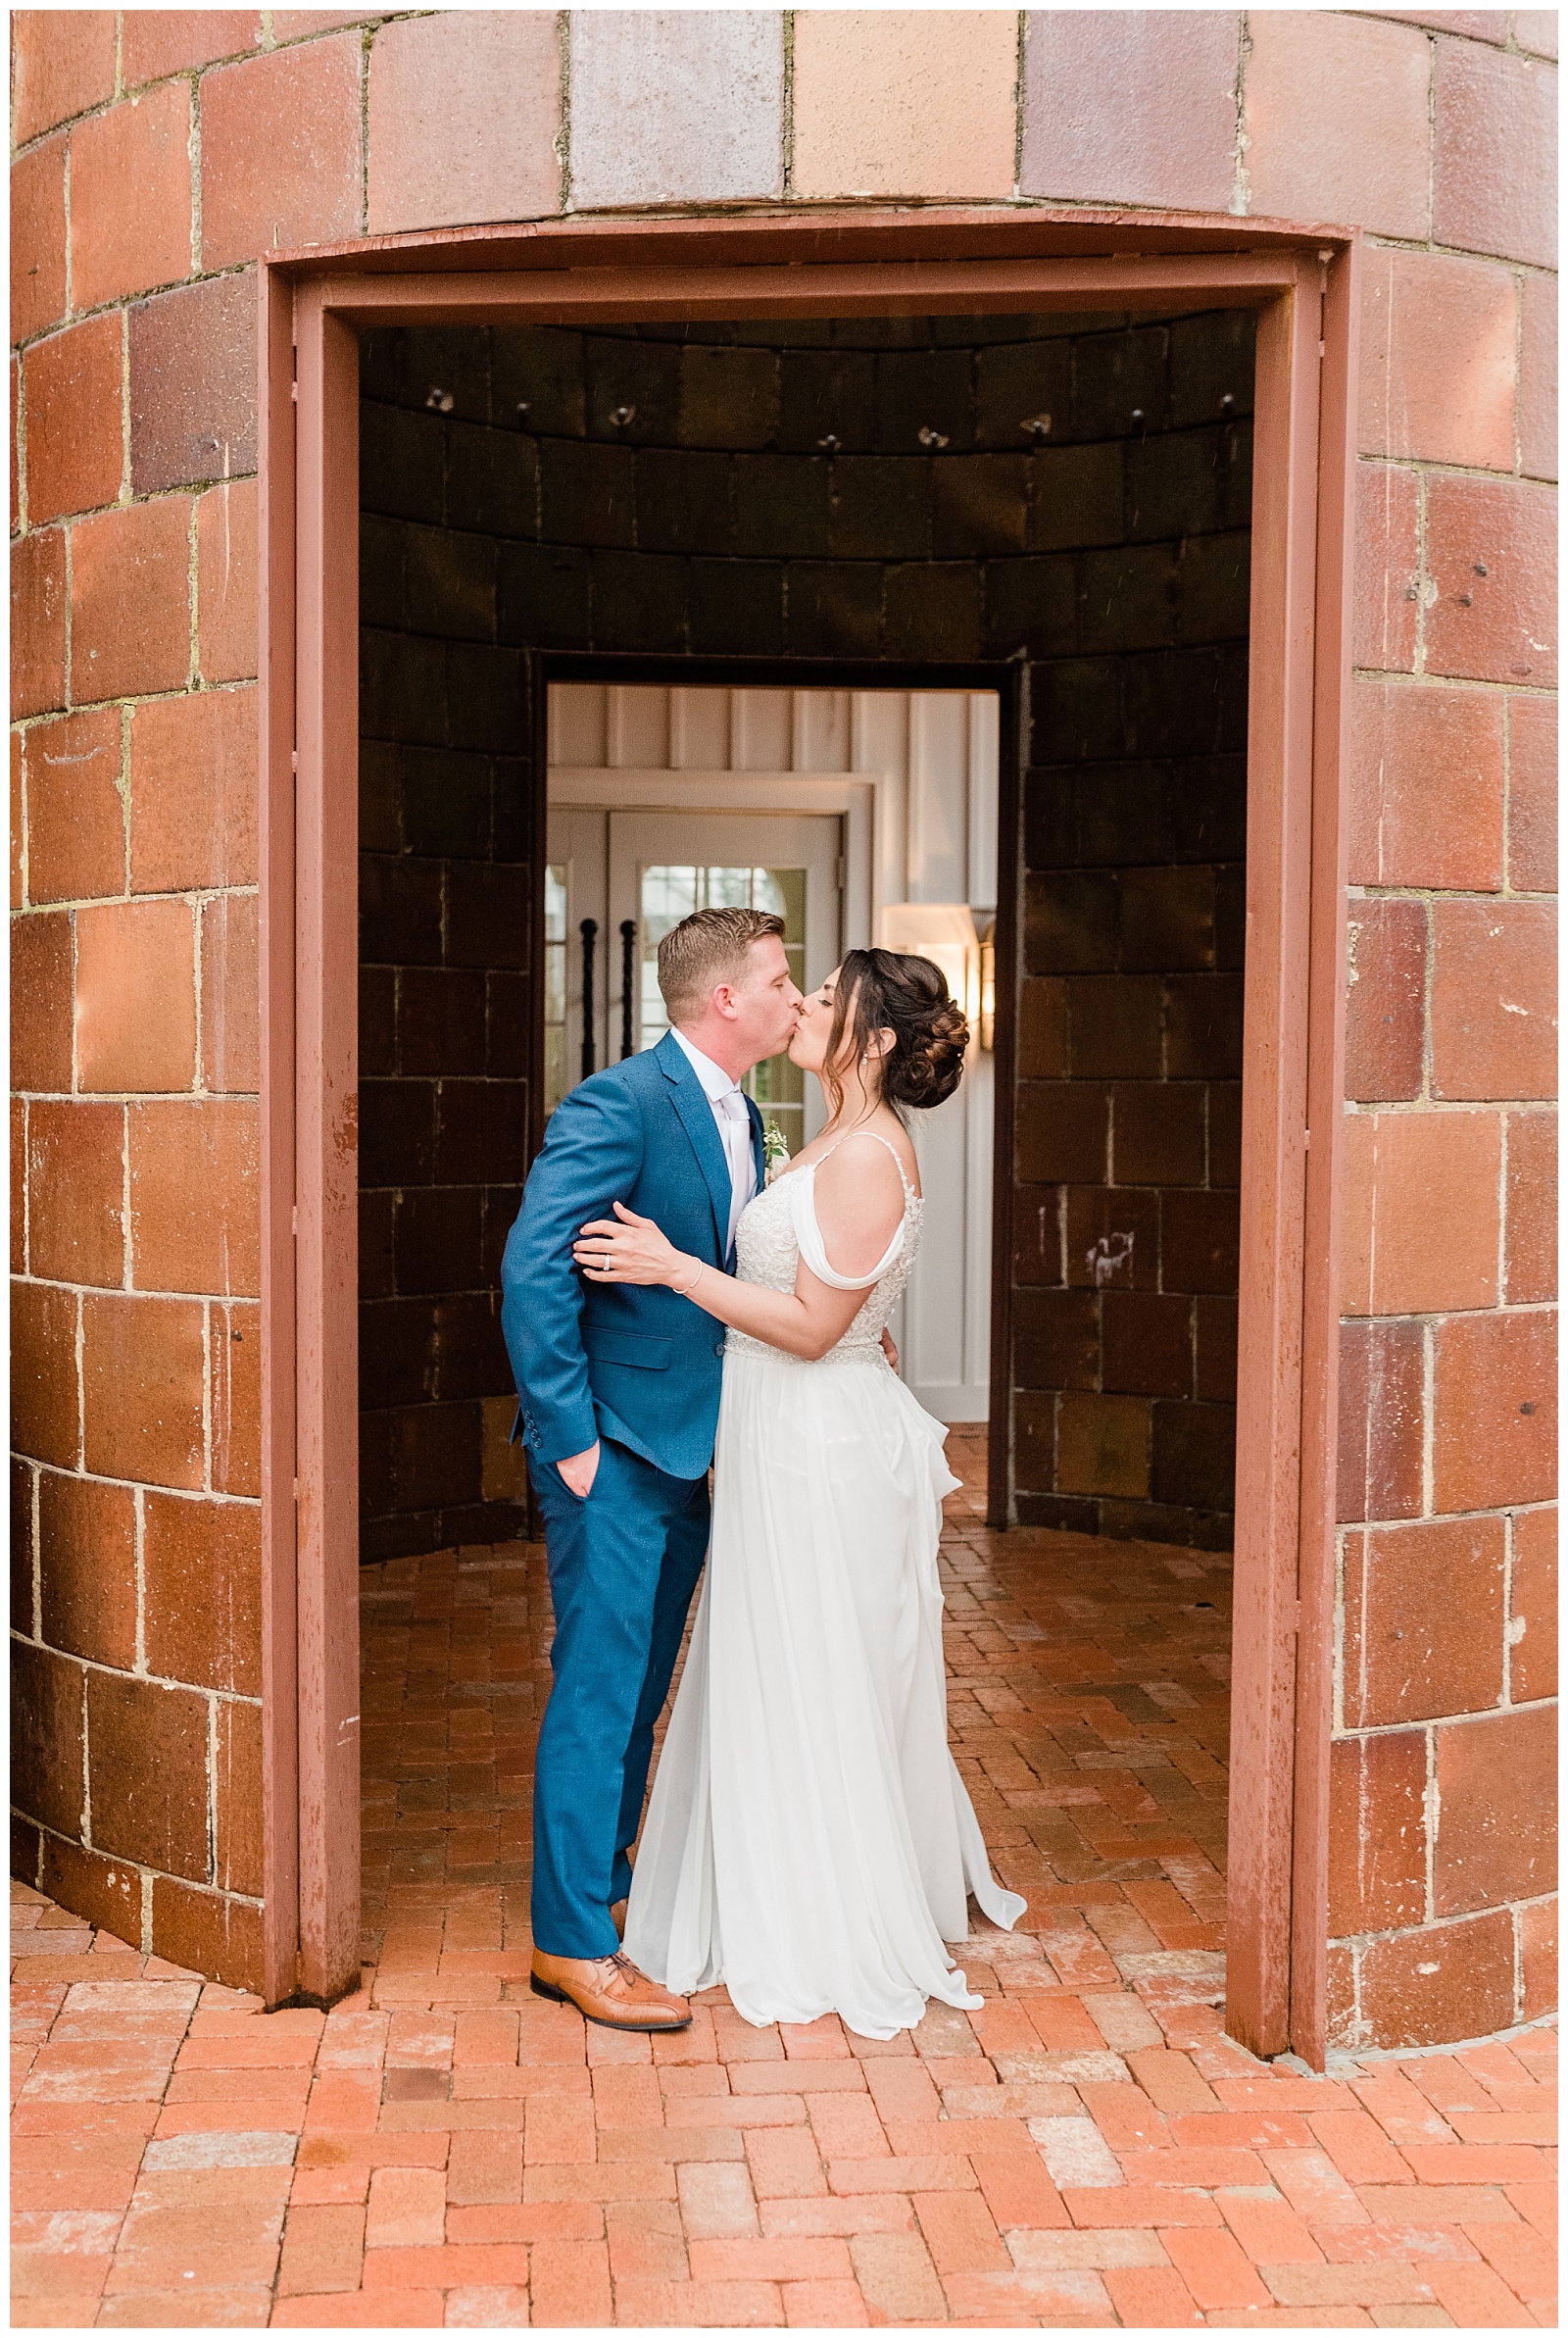 Bride and groom kiss in the doorway of a silo at the Coach House at Ryland Inn.